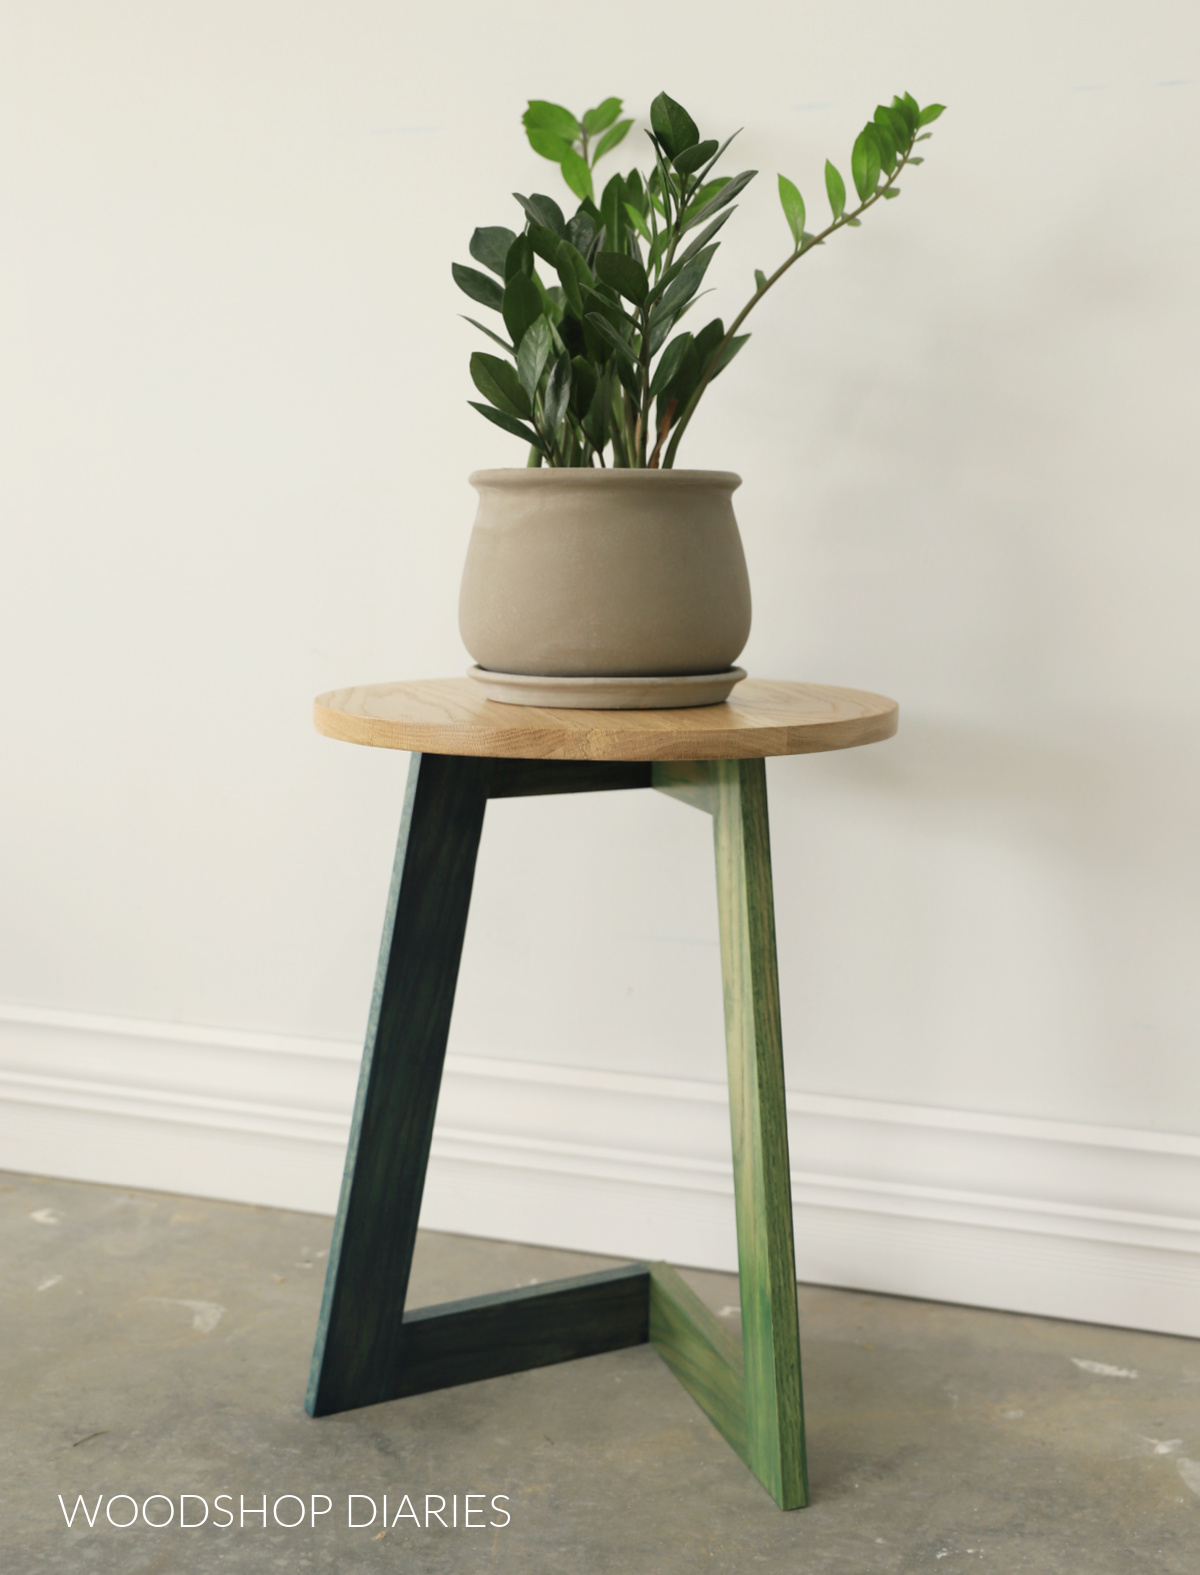 Blue, green, and white oak side table used as a plant stand with ZZ plant on top